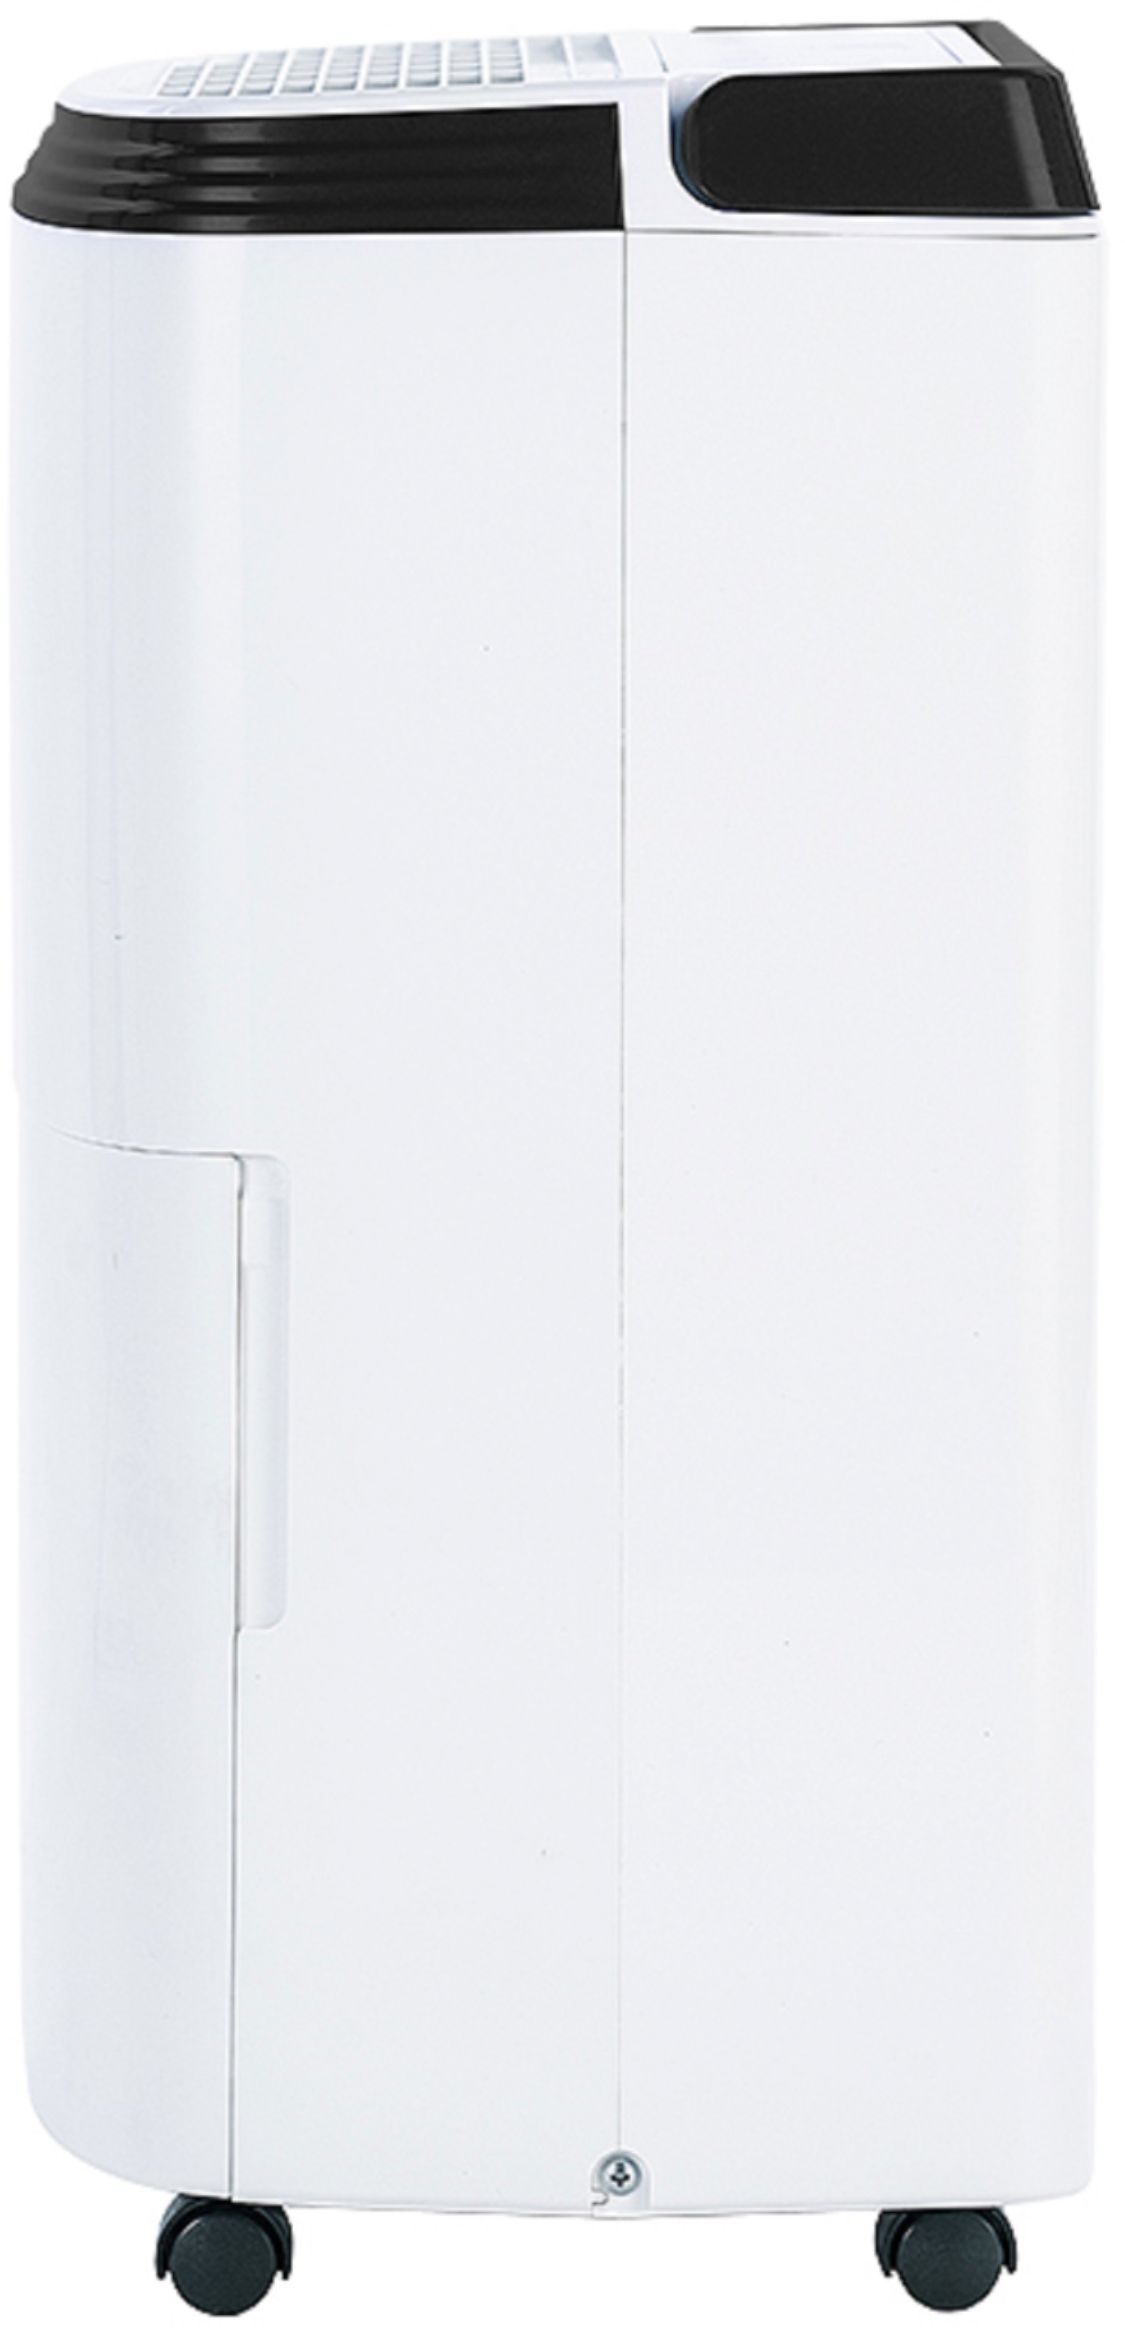 Left View: Honeywell - Smart WiFi Energy Star Dehumidifier for Basements & Rooms Up to 4000 Sq.Ft. with Alexa Voice Control & Anti-Spill Design - White